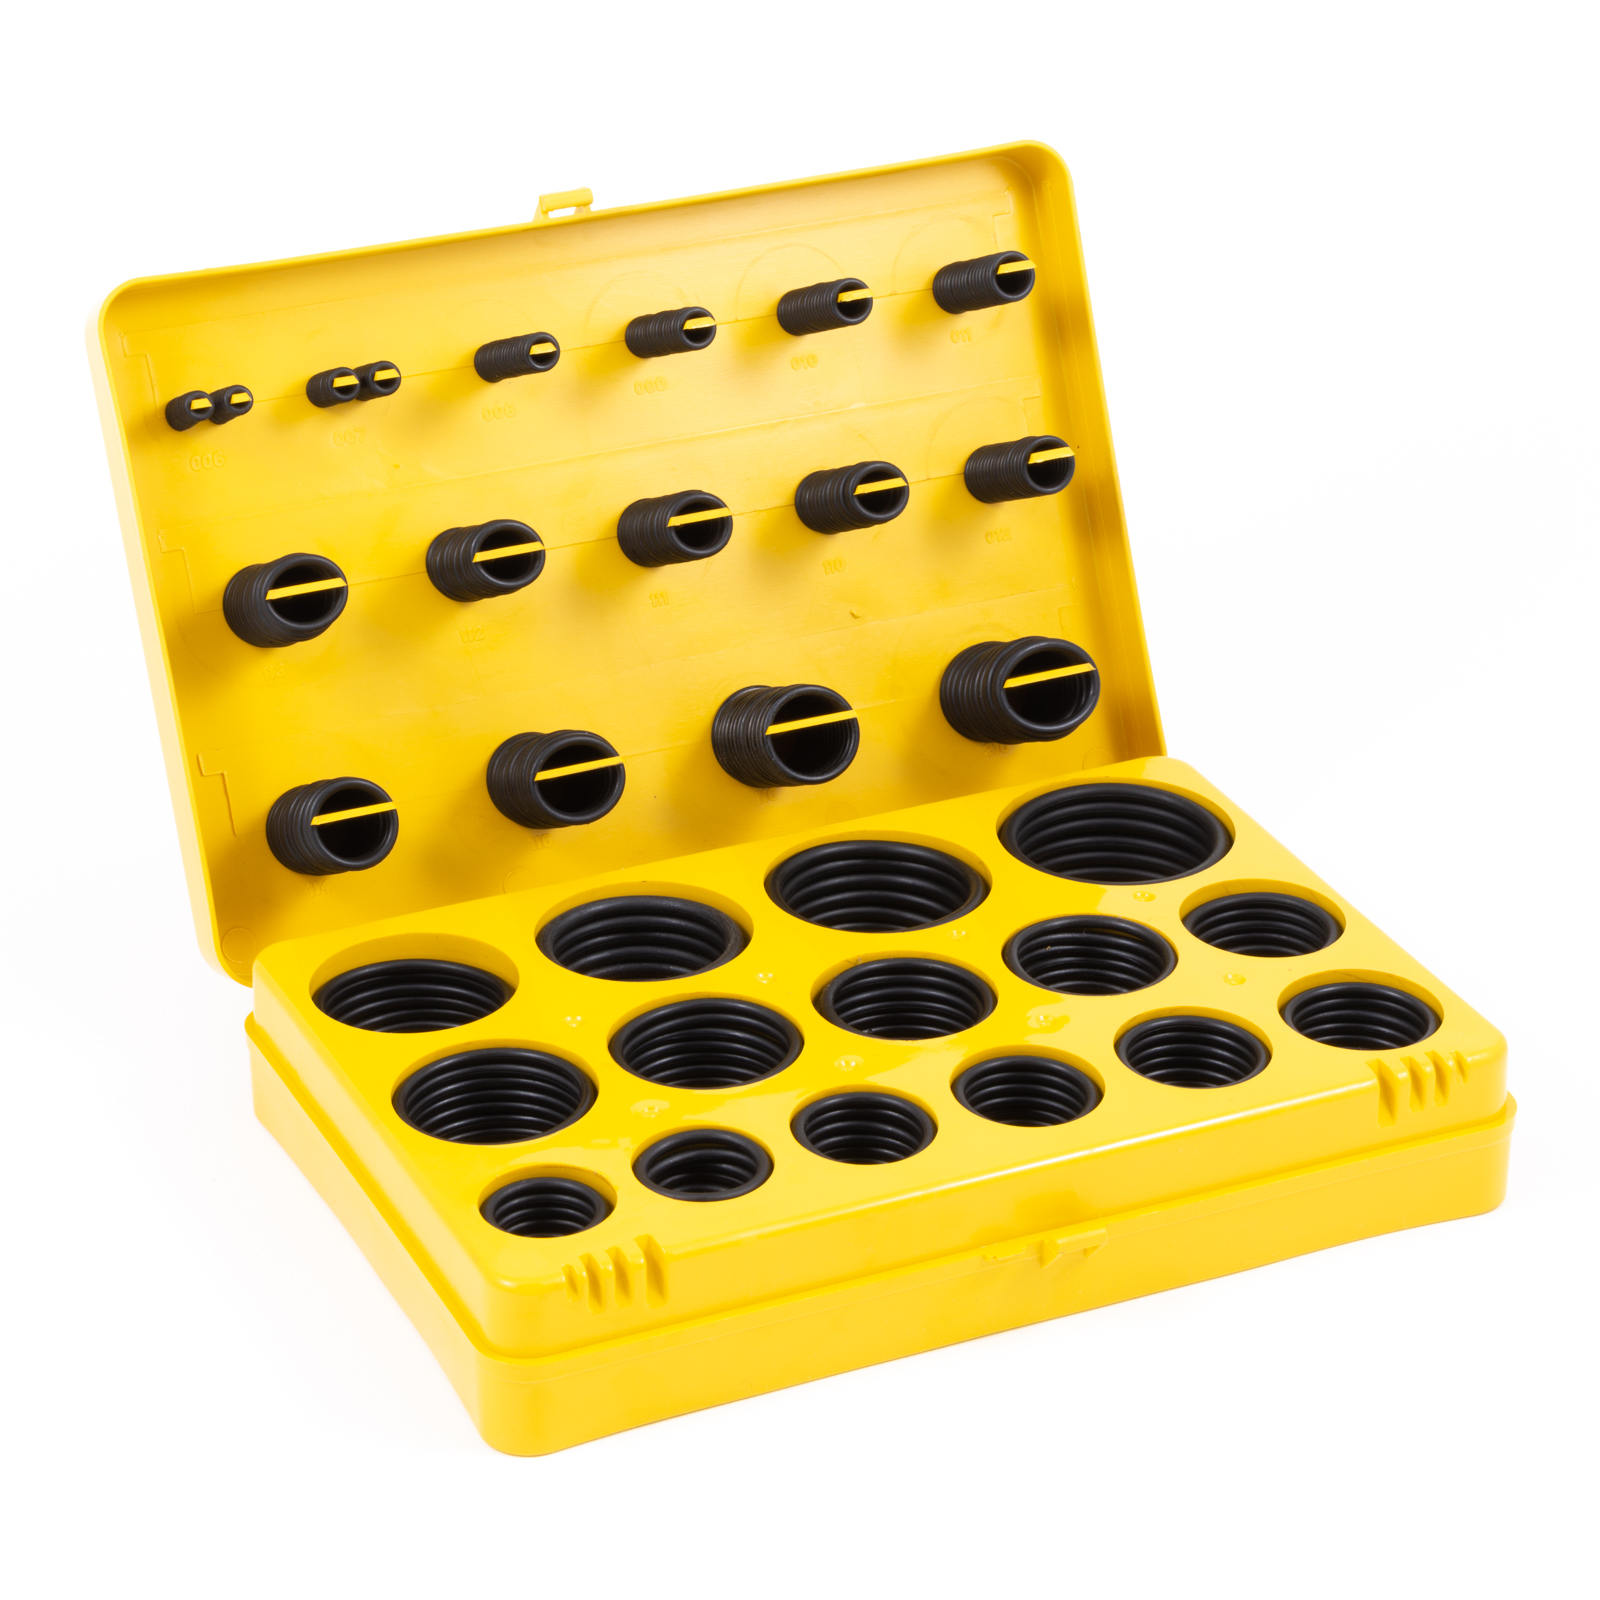 Glarks 423Pcs 32 Sizes Metric O-Ring Assortment Kit Including 419Pcs  Nitrile Rubber NBR O-Ring and 4Pcs Pick and Hooks for Plumbing Repair, Air  or Gas Sealing Connections: Amazon.com: Industrial & Scientific